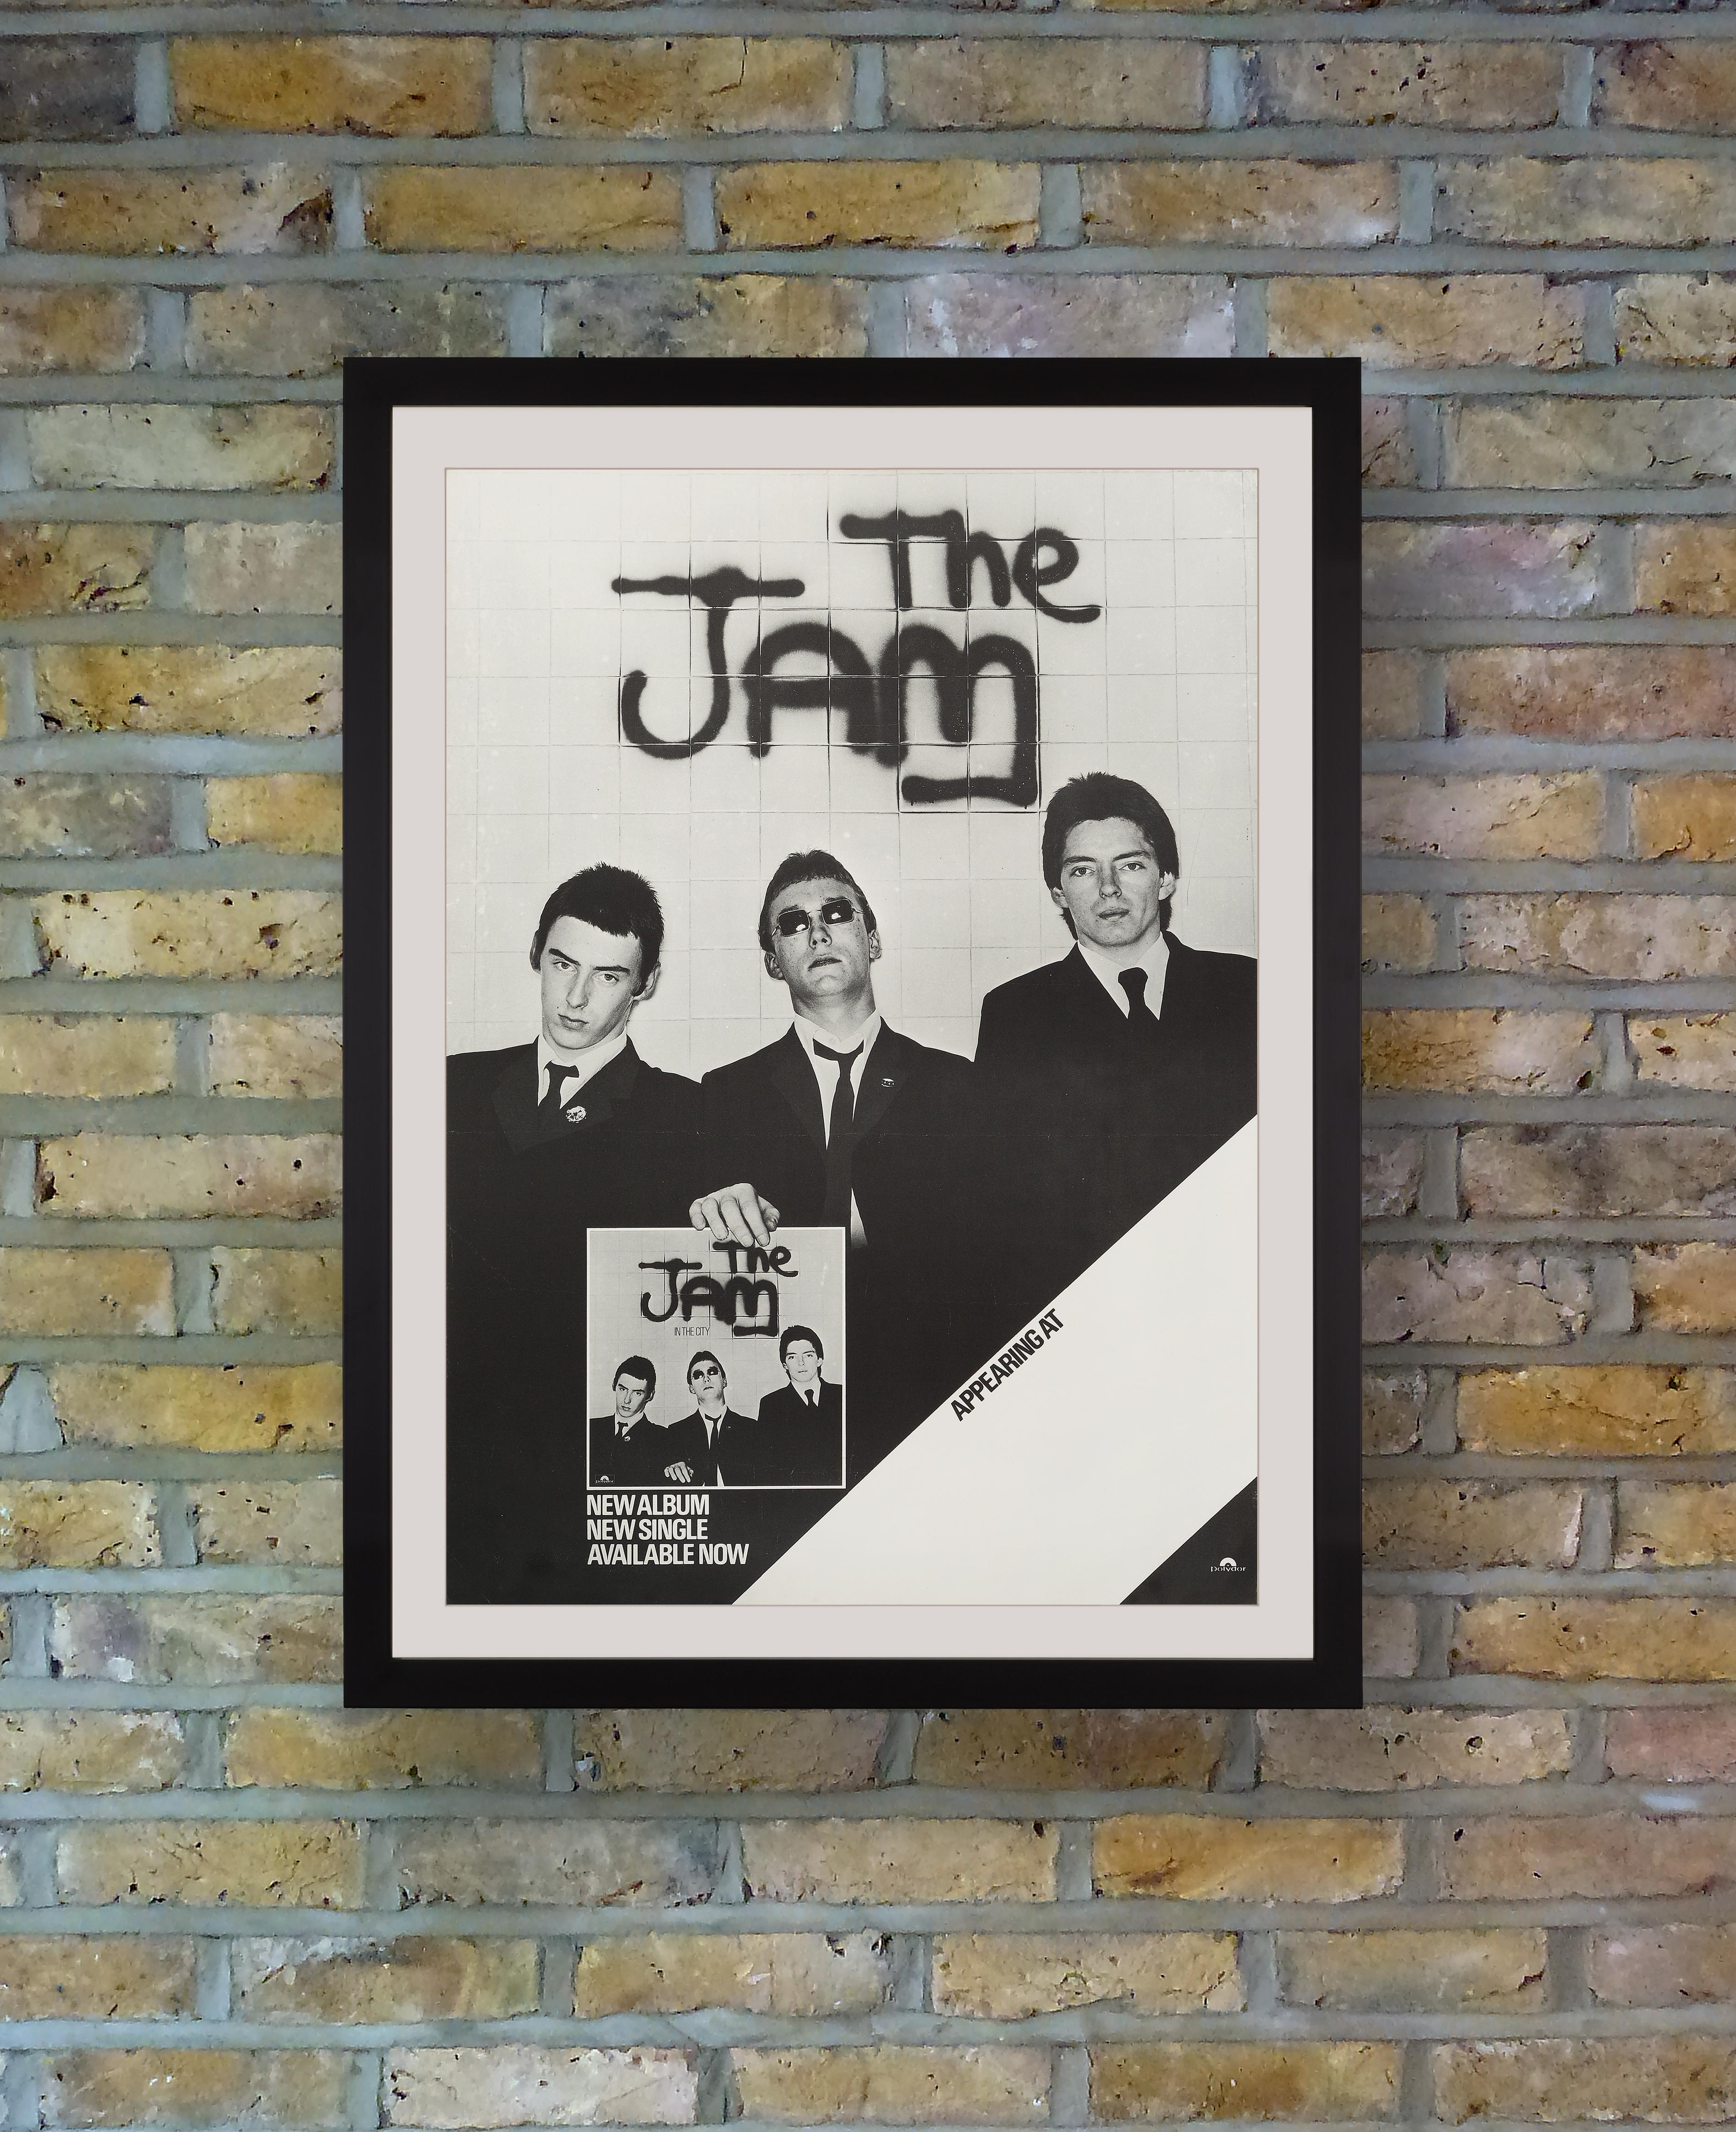 A rare 'tour blank' issued by Polydor Records to promote mod revival group The Jam's 1977 In The City tour in support of their debut studio album 